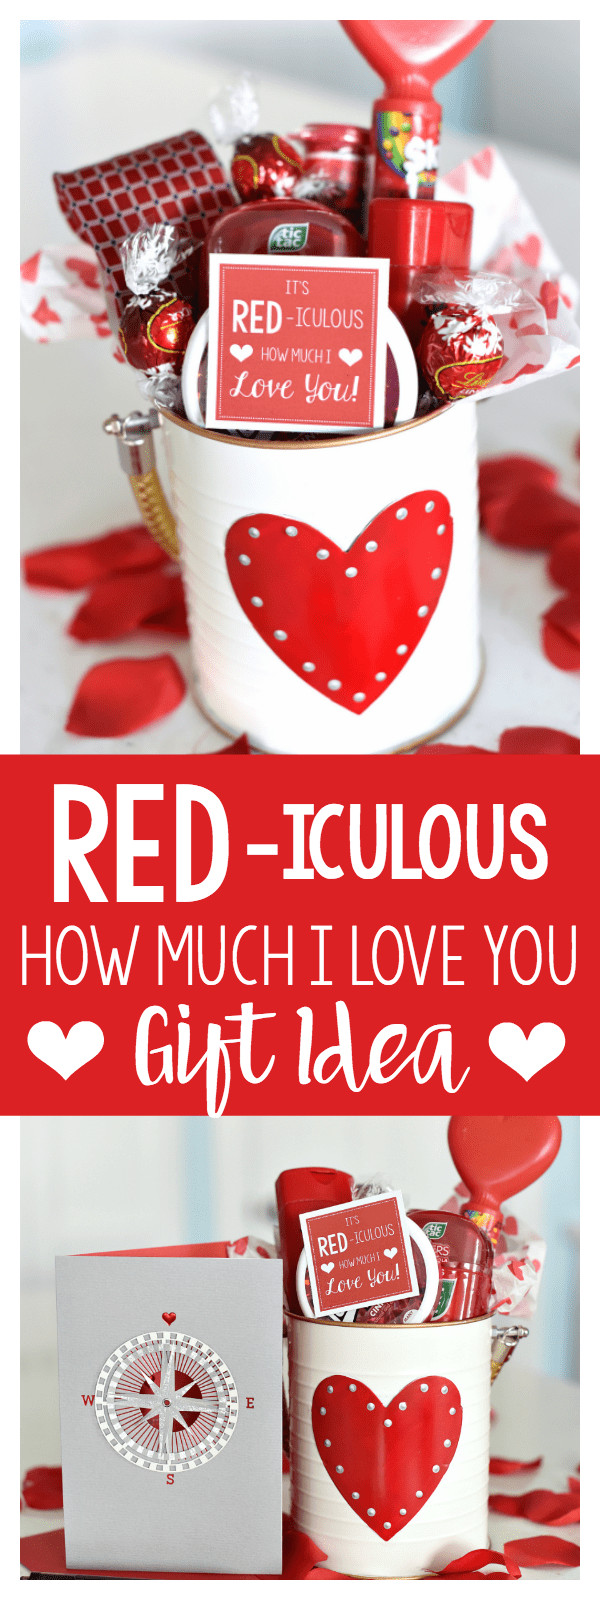 Good Valentines Day Gifts
 Cute Valentine s Day Gift Idea RED iculous Basket